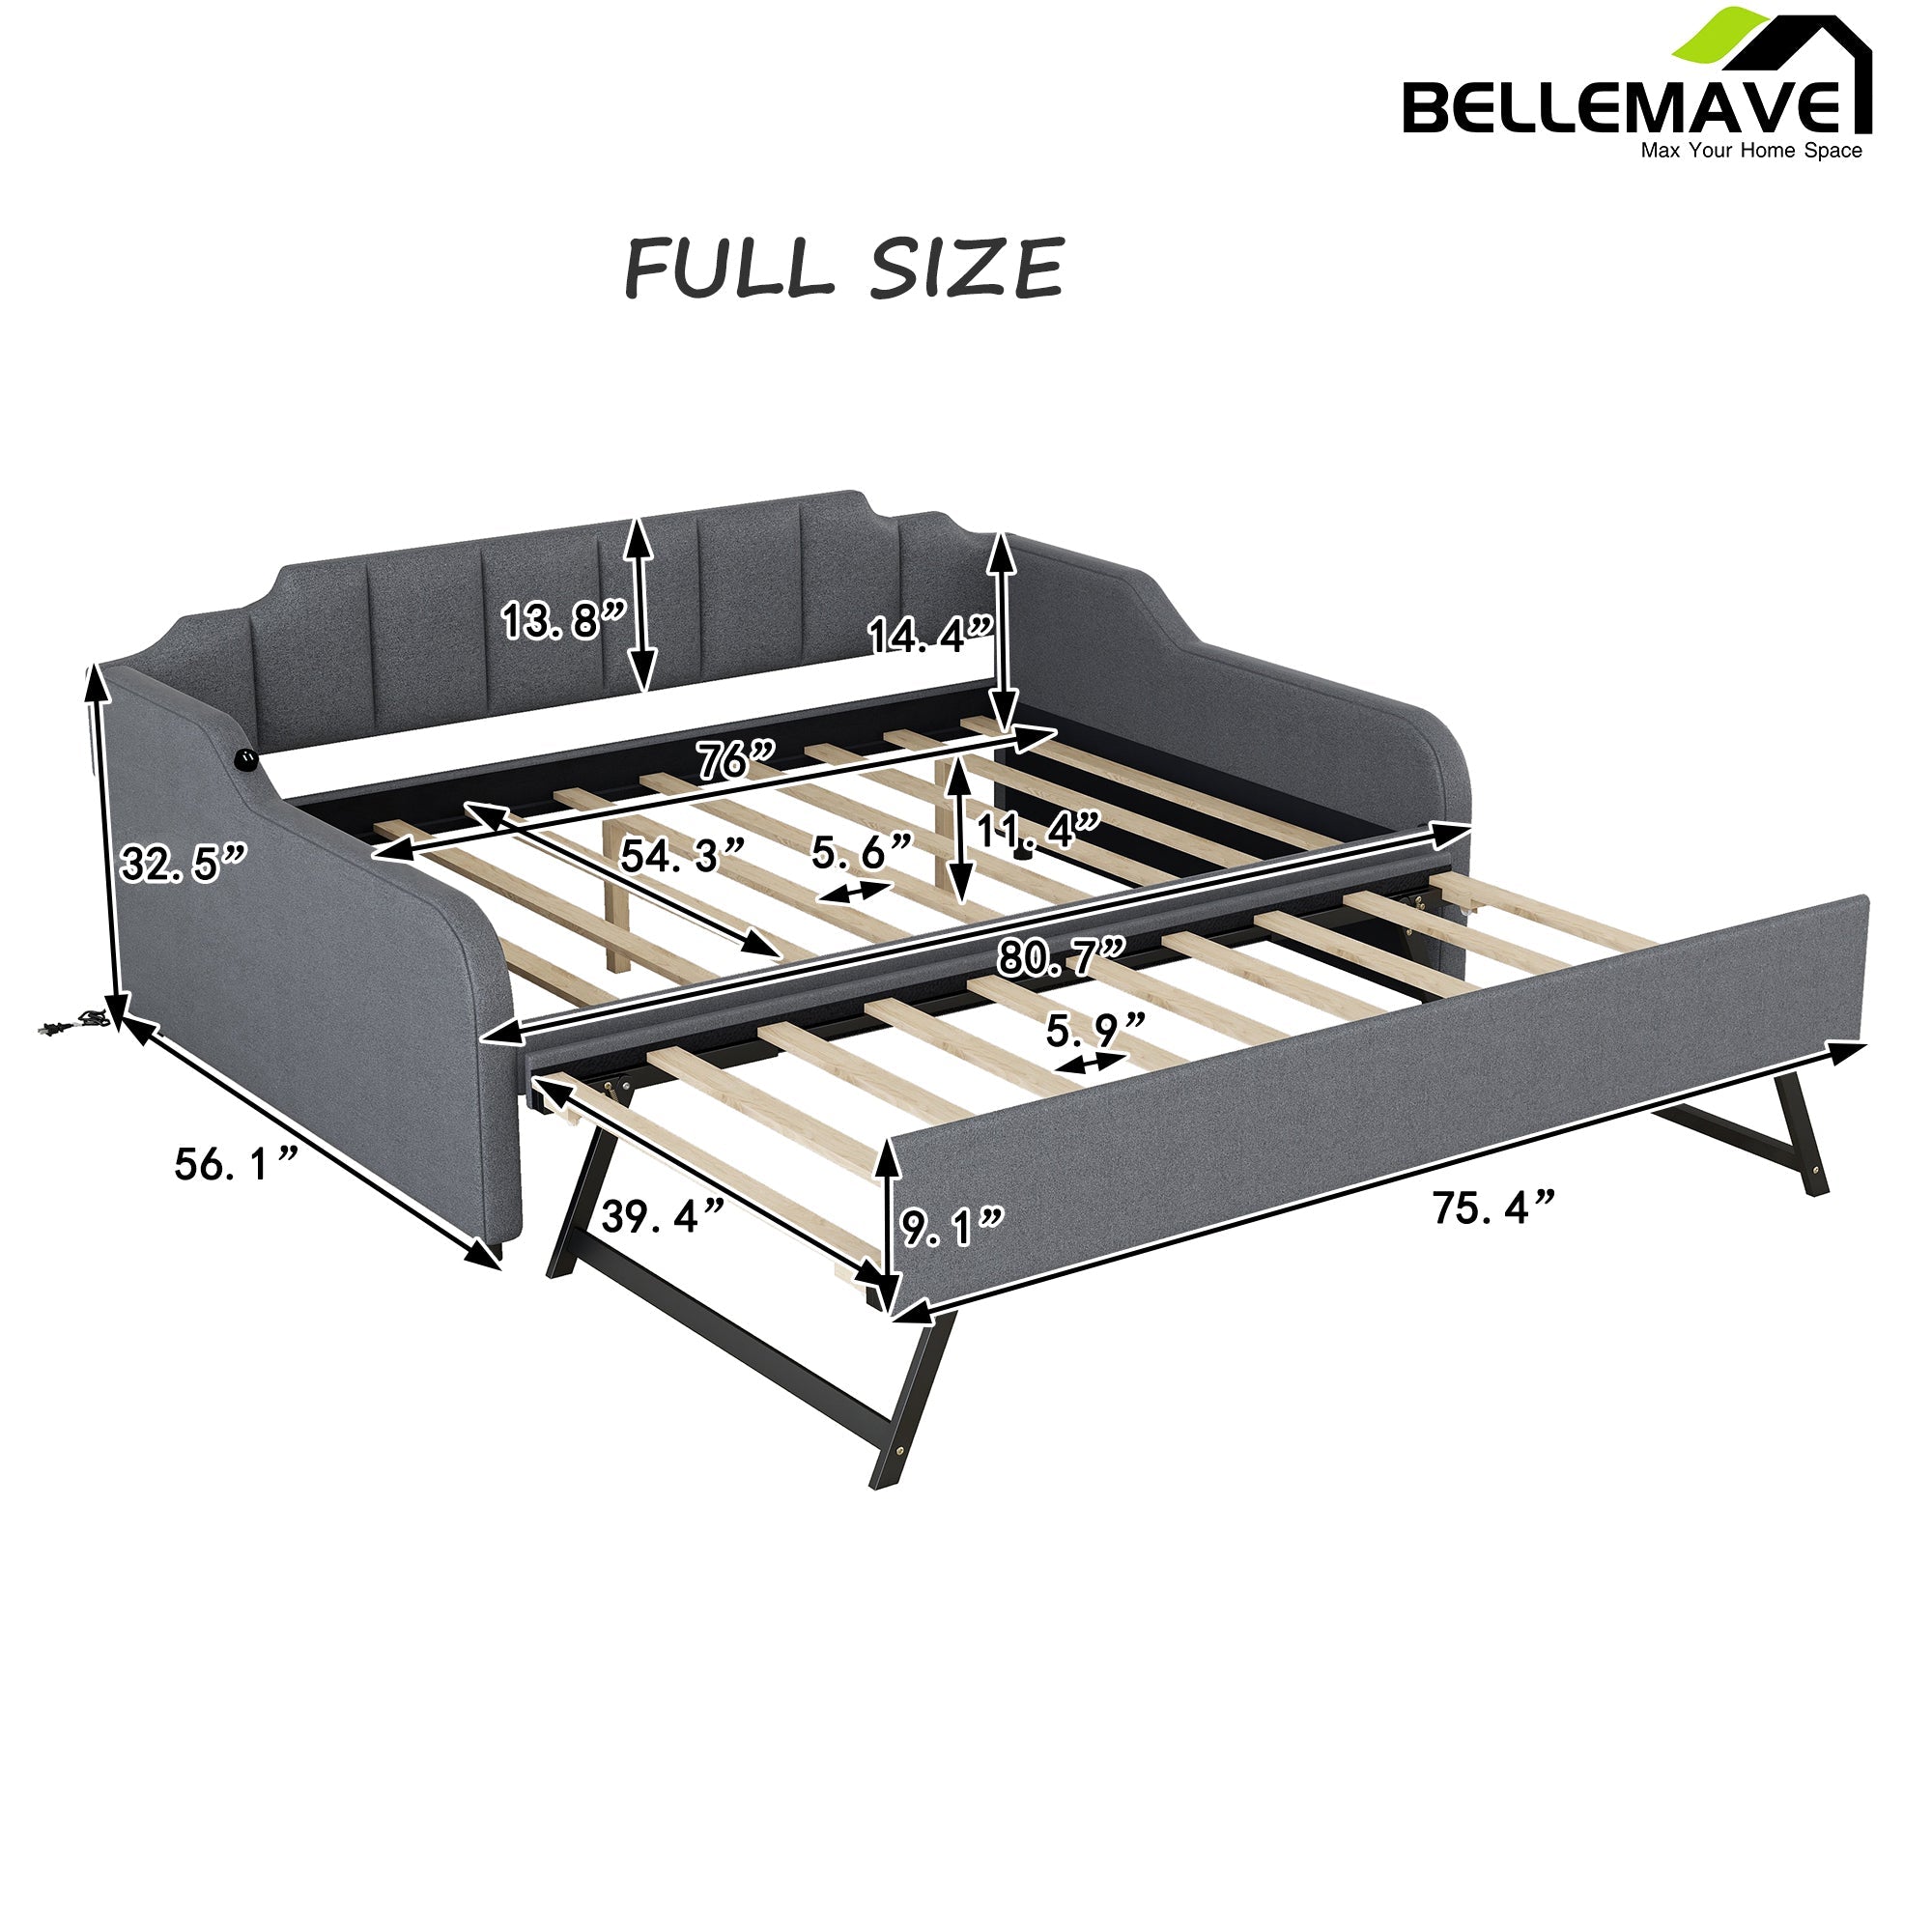 Bellemave Full Size Upholstery Daybed with Trundle and USB Charging - Bellemave